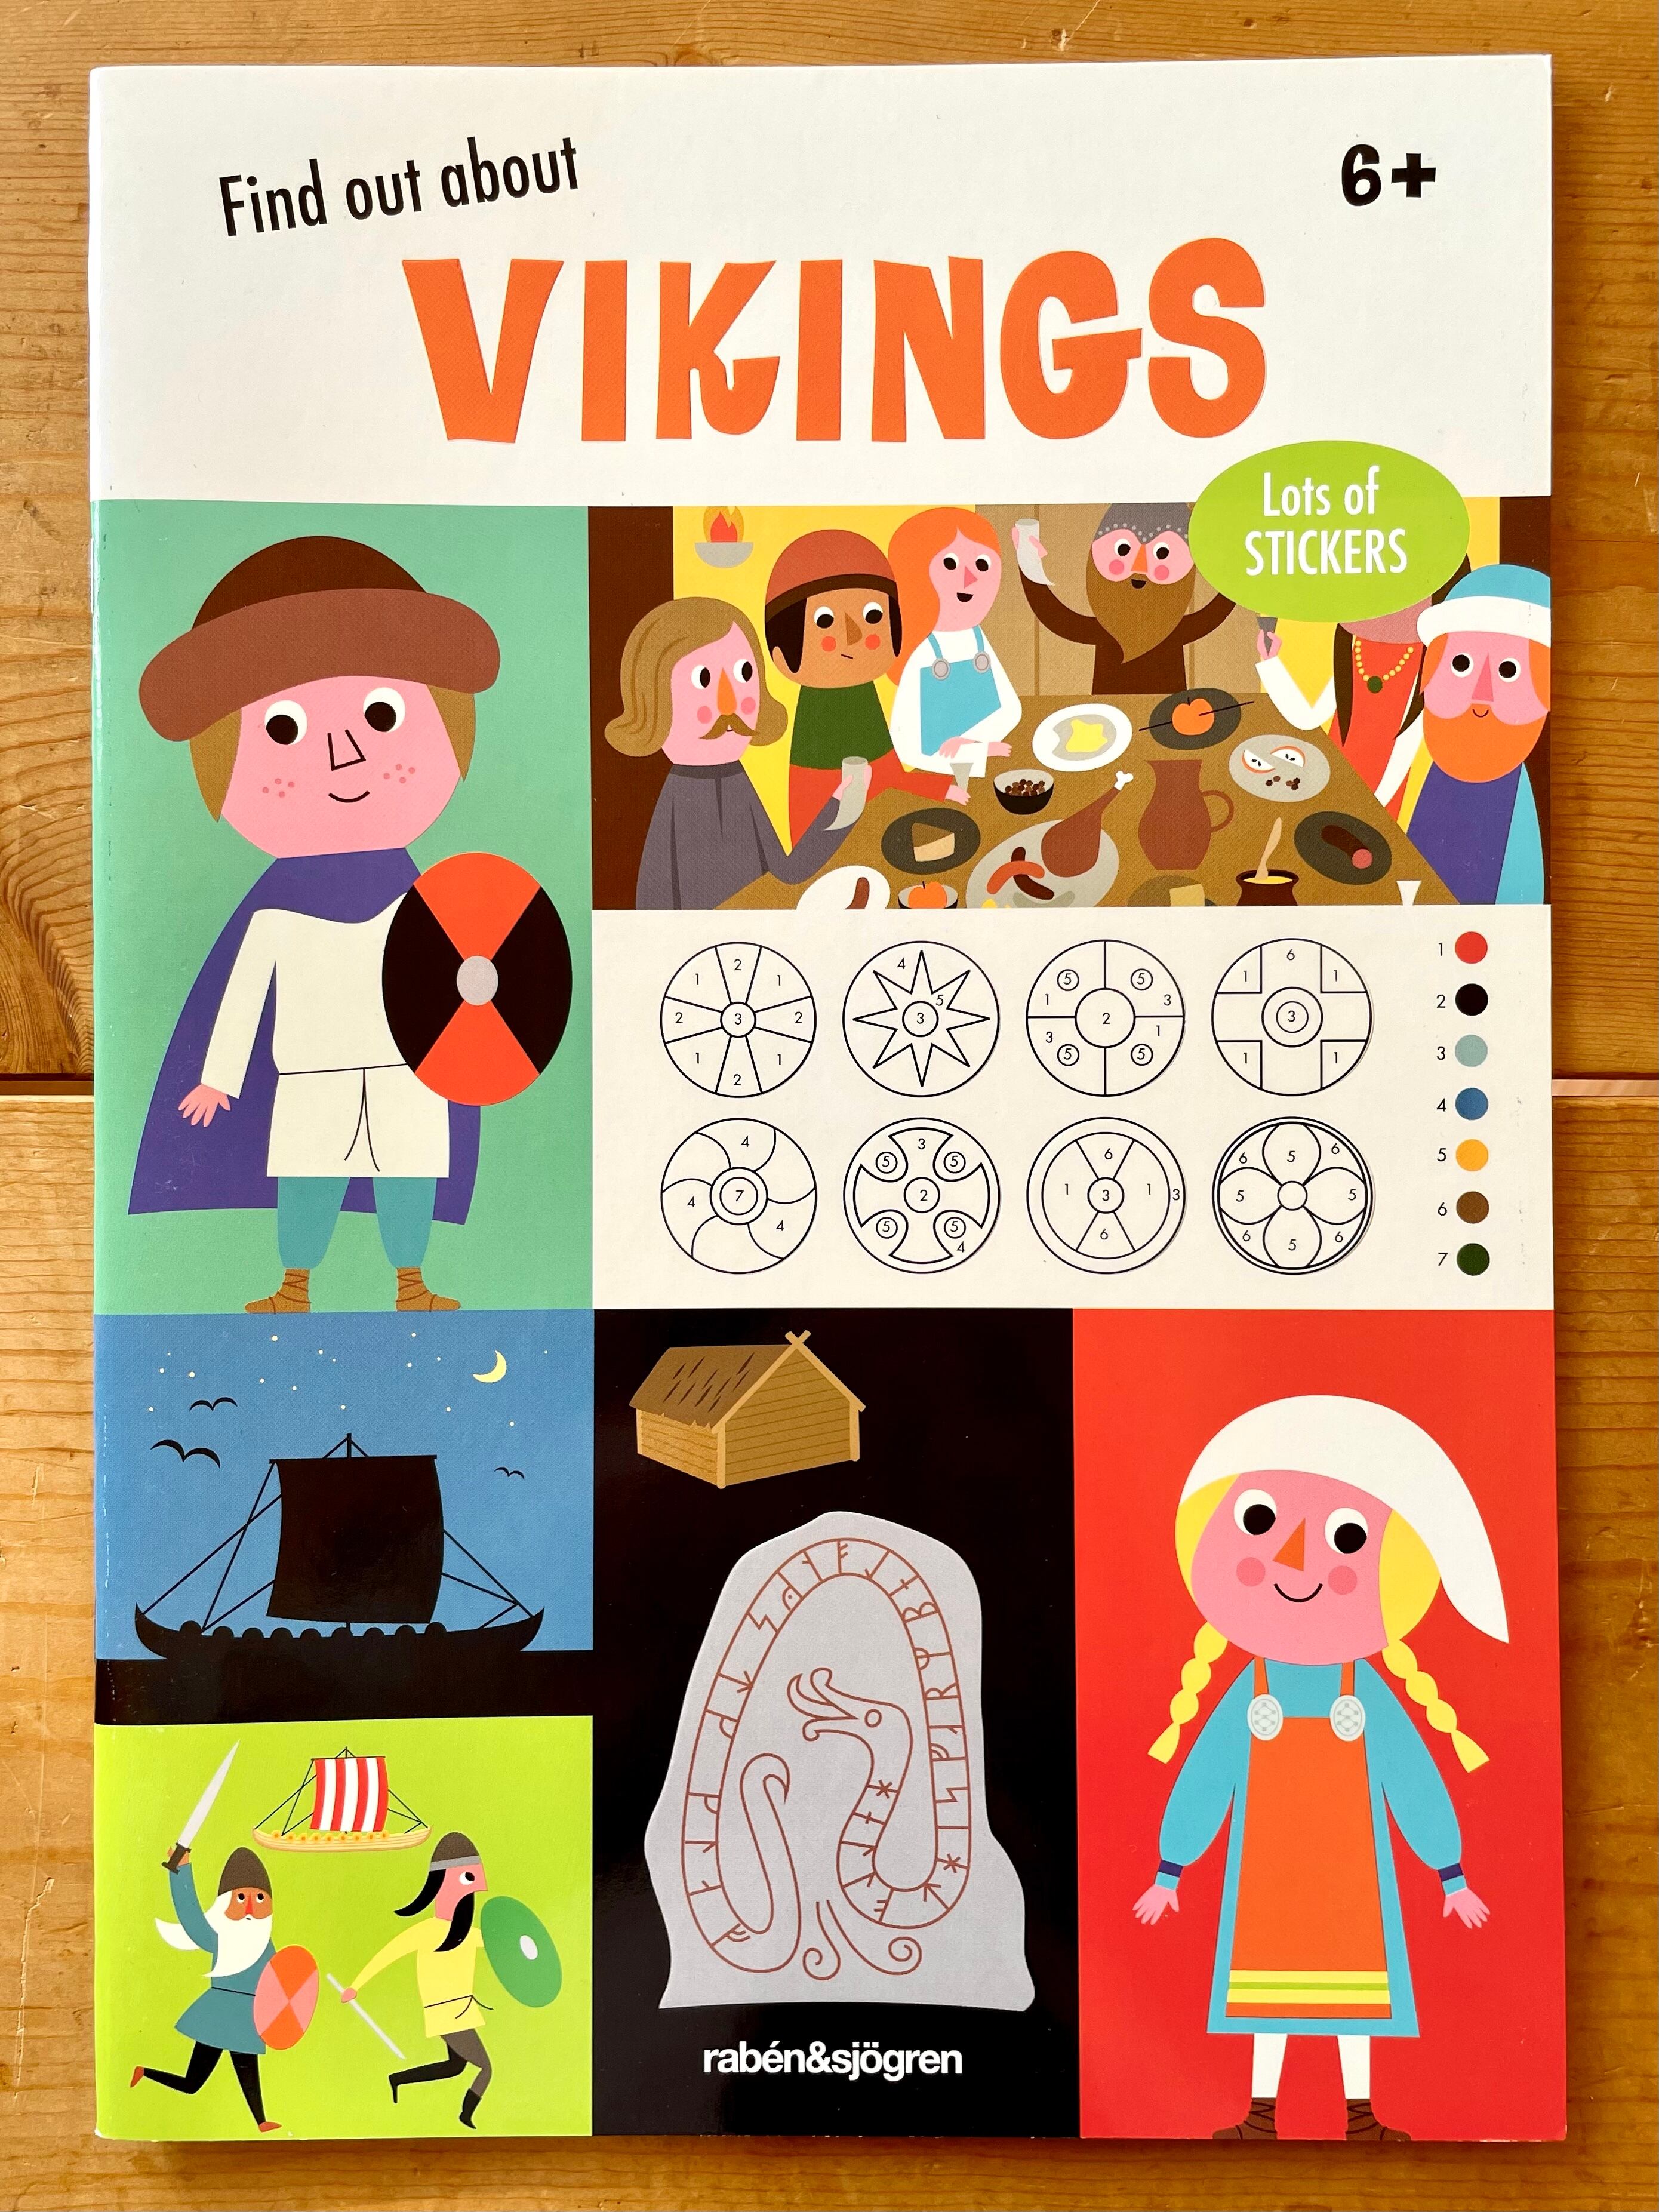 Find out about VIKINGS